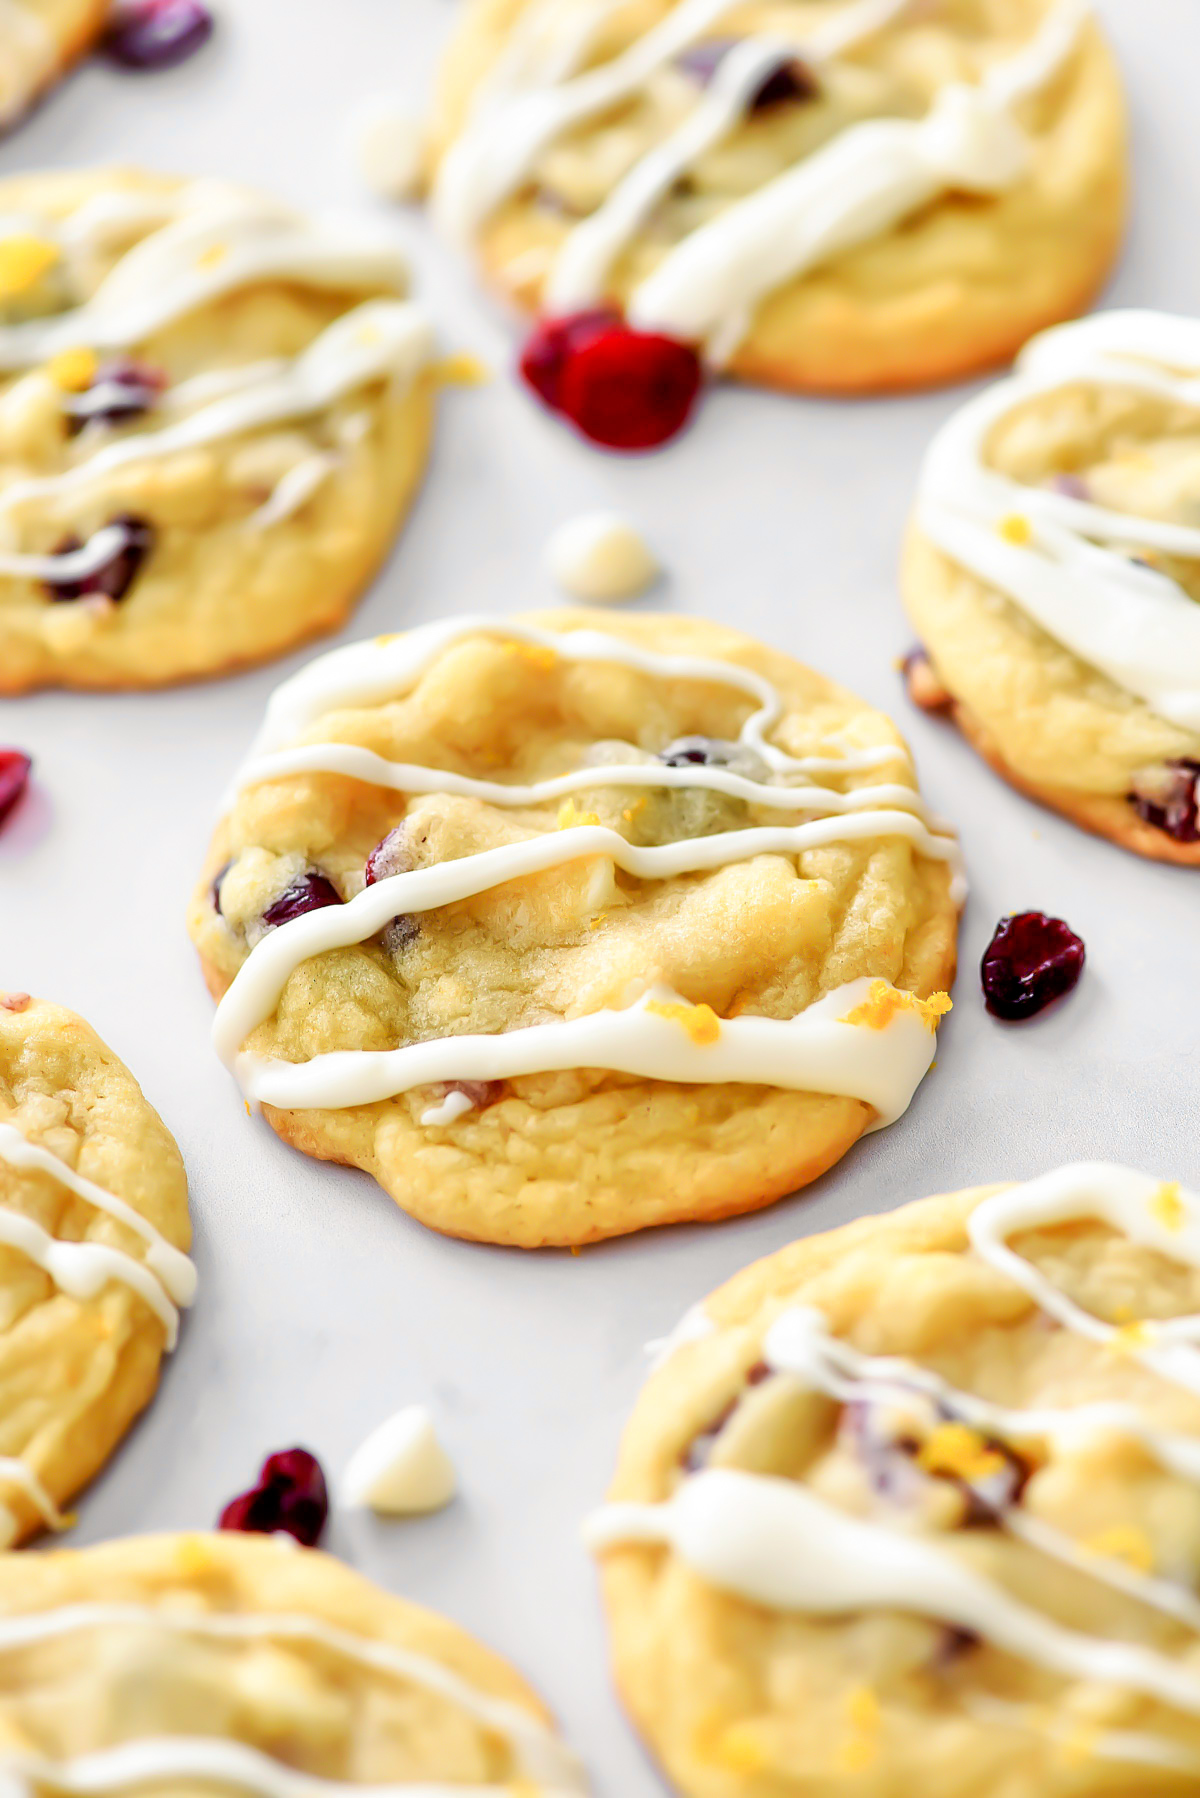 White Chocolate Cranberry Orange Cookies are sweet, soft cookies full of orange and cranberry flavors. Life-in-the-Lofthouse.com